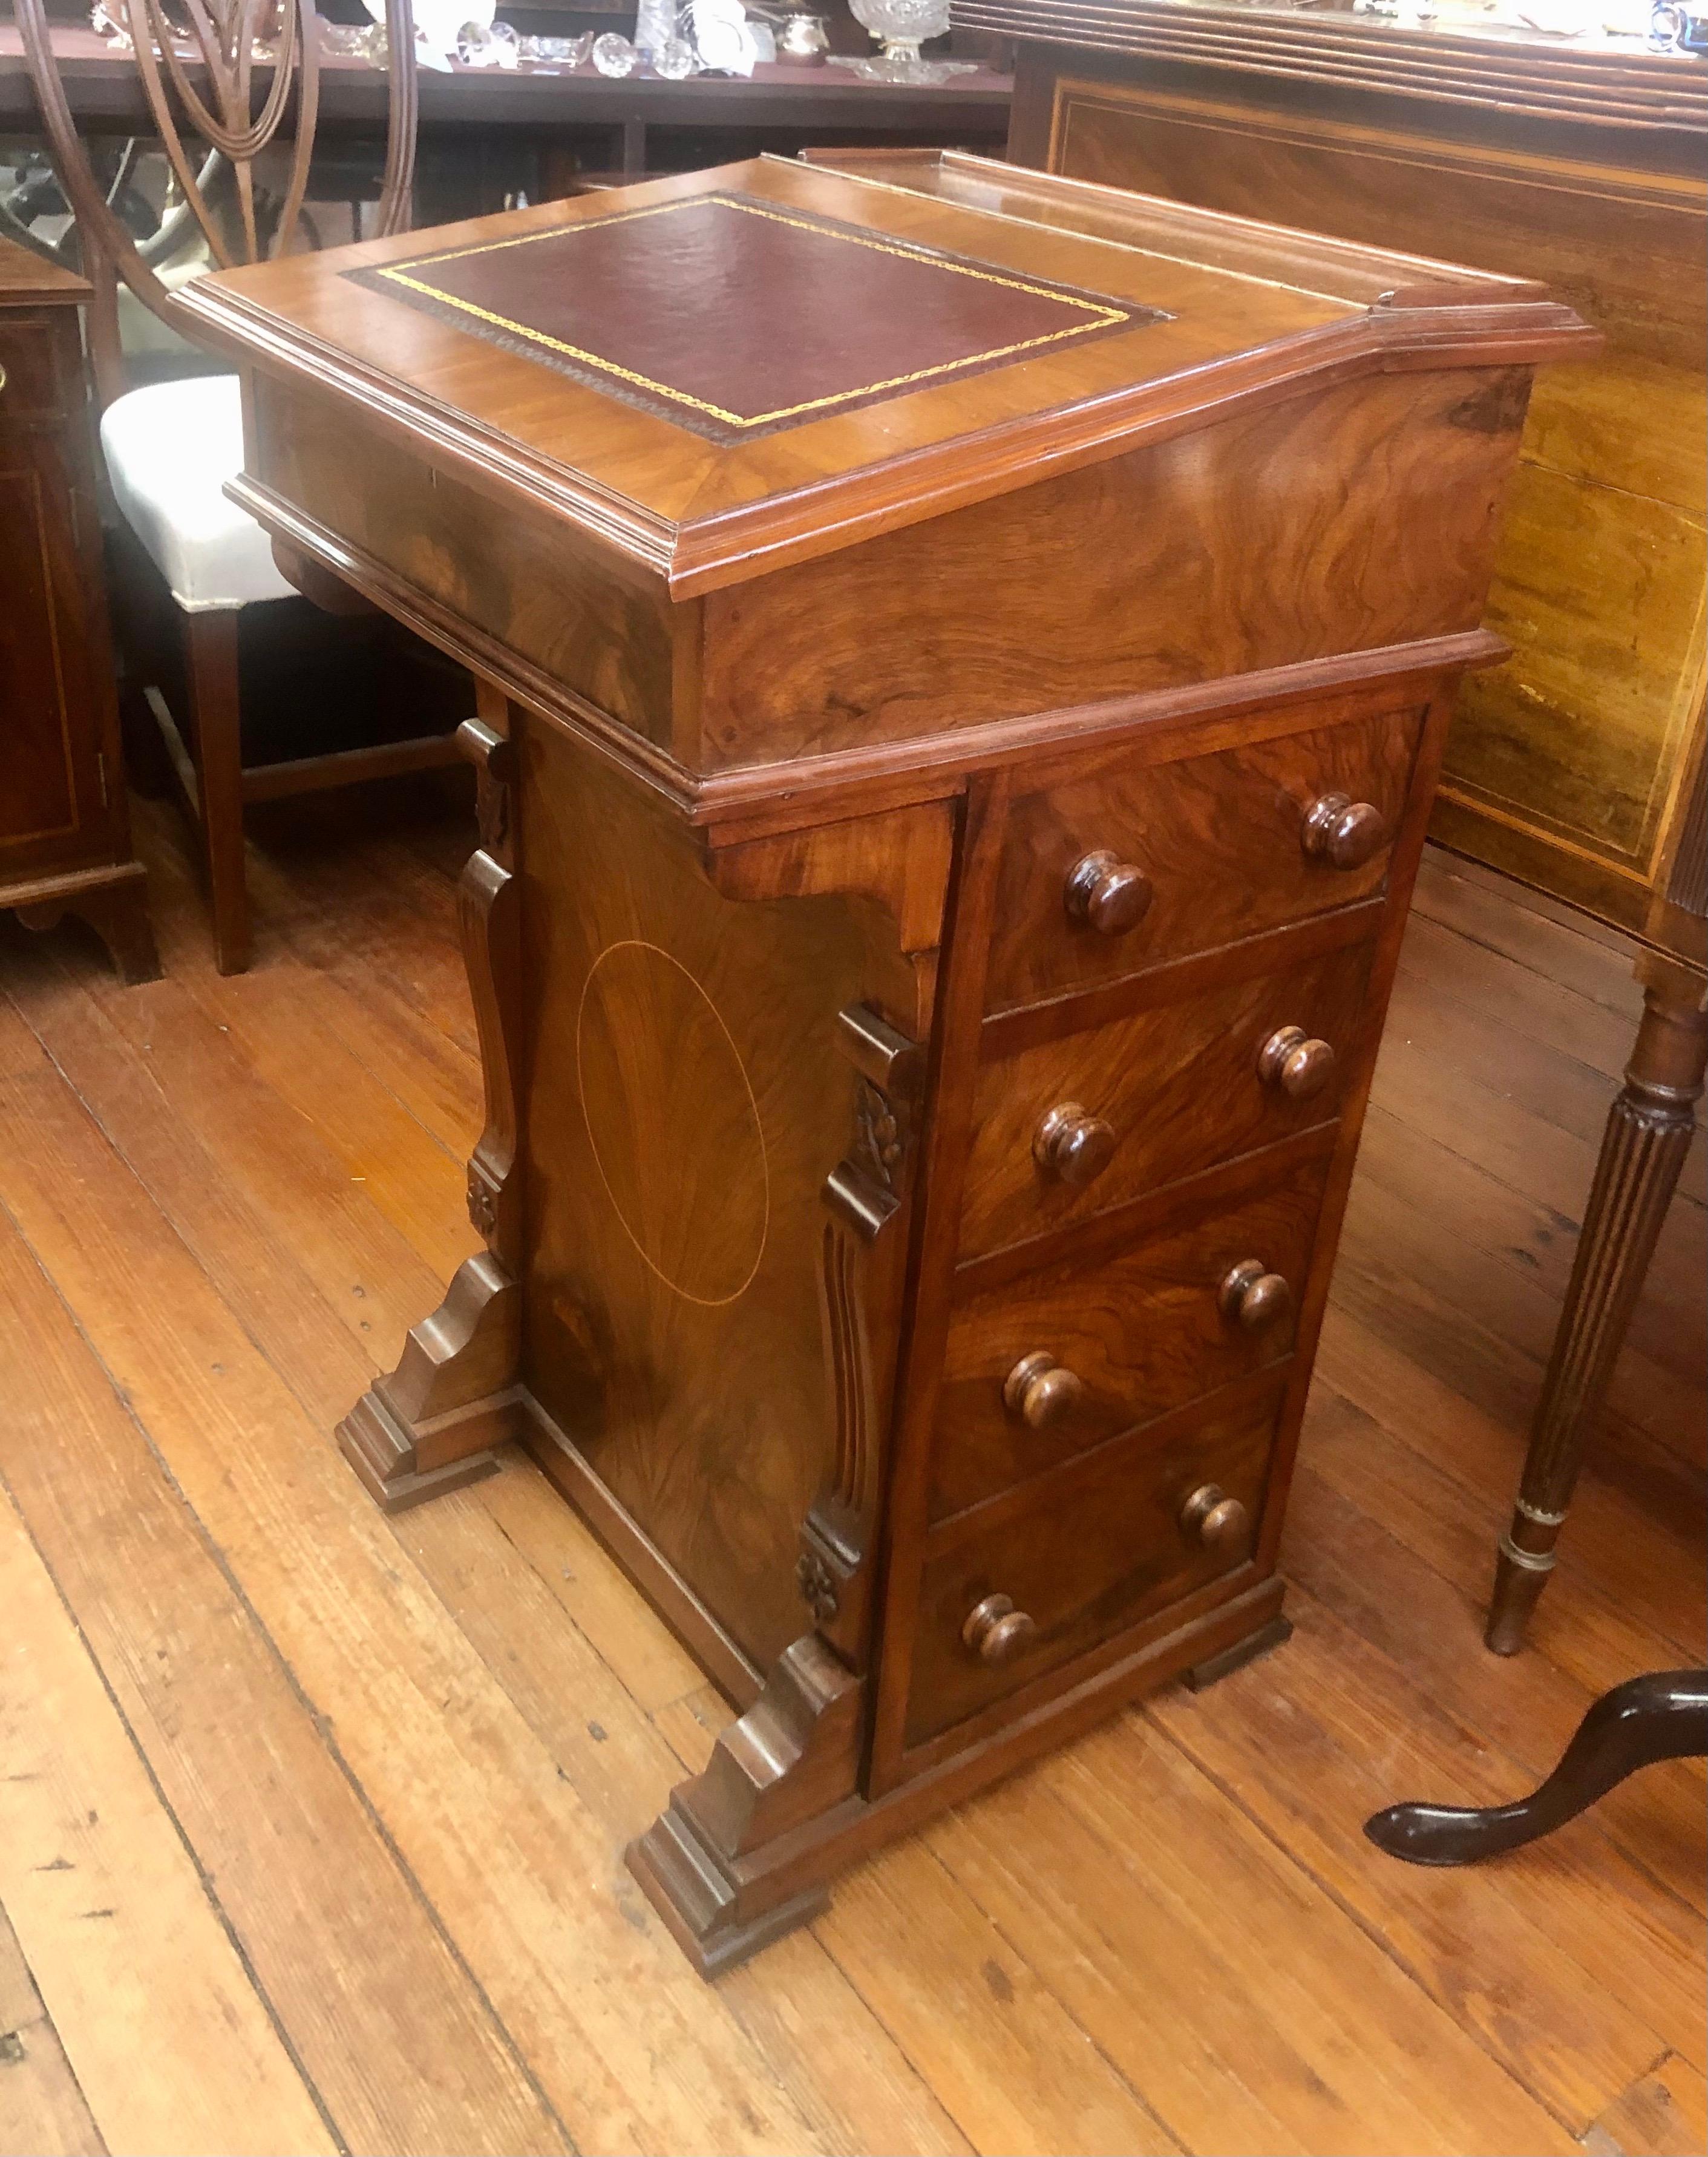 Fine quality antique English leather top inlaid burr walnut davenport or ship captain's desk with lift-up top revealing a series of side by side small drawers. The exterior has a bank of useful drawers one over the other on the left side with a